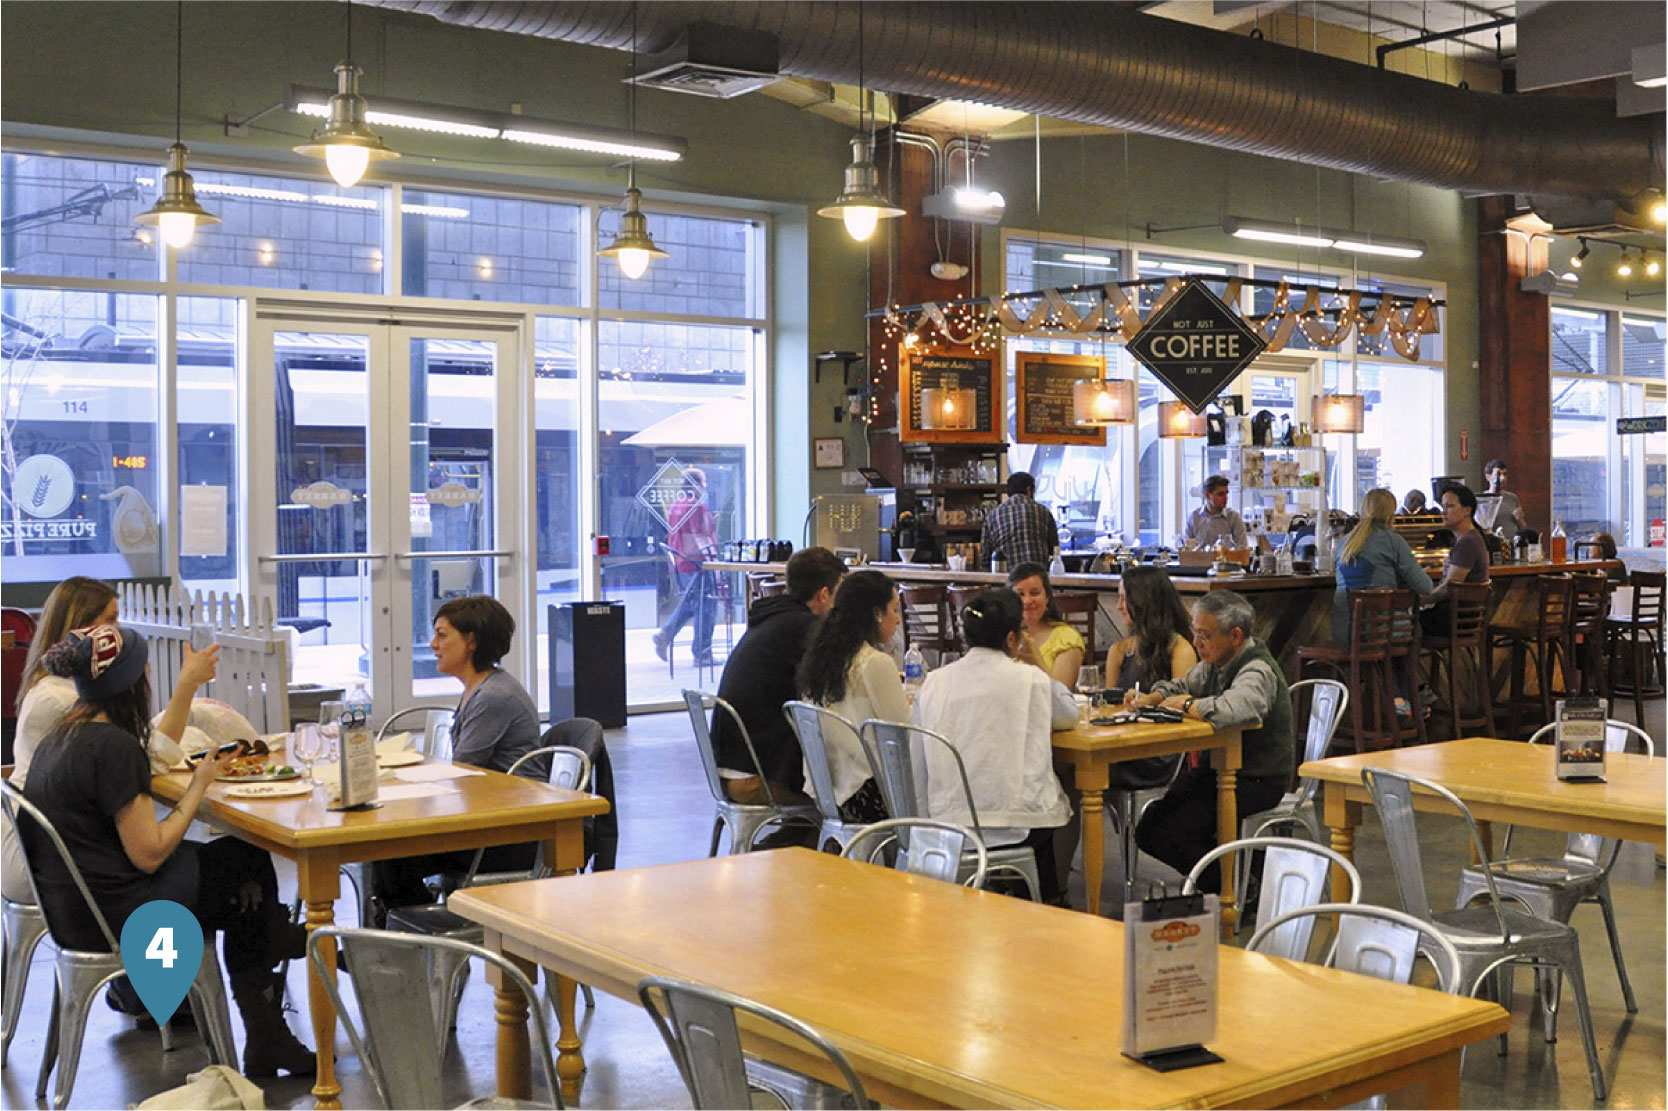 Customers sitting and eating at the 7th Street Public Market in Charlotte, North Carolina